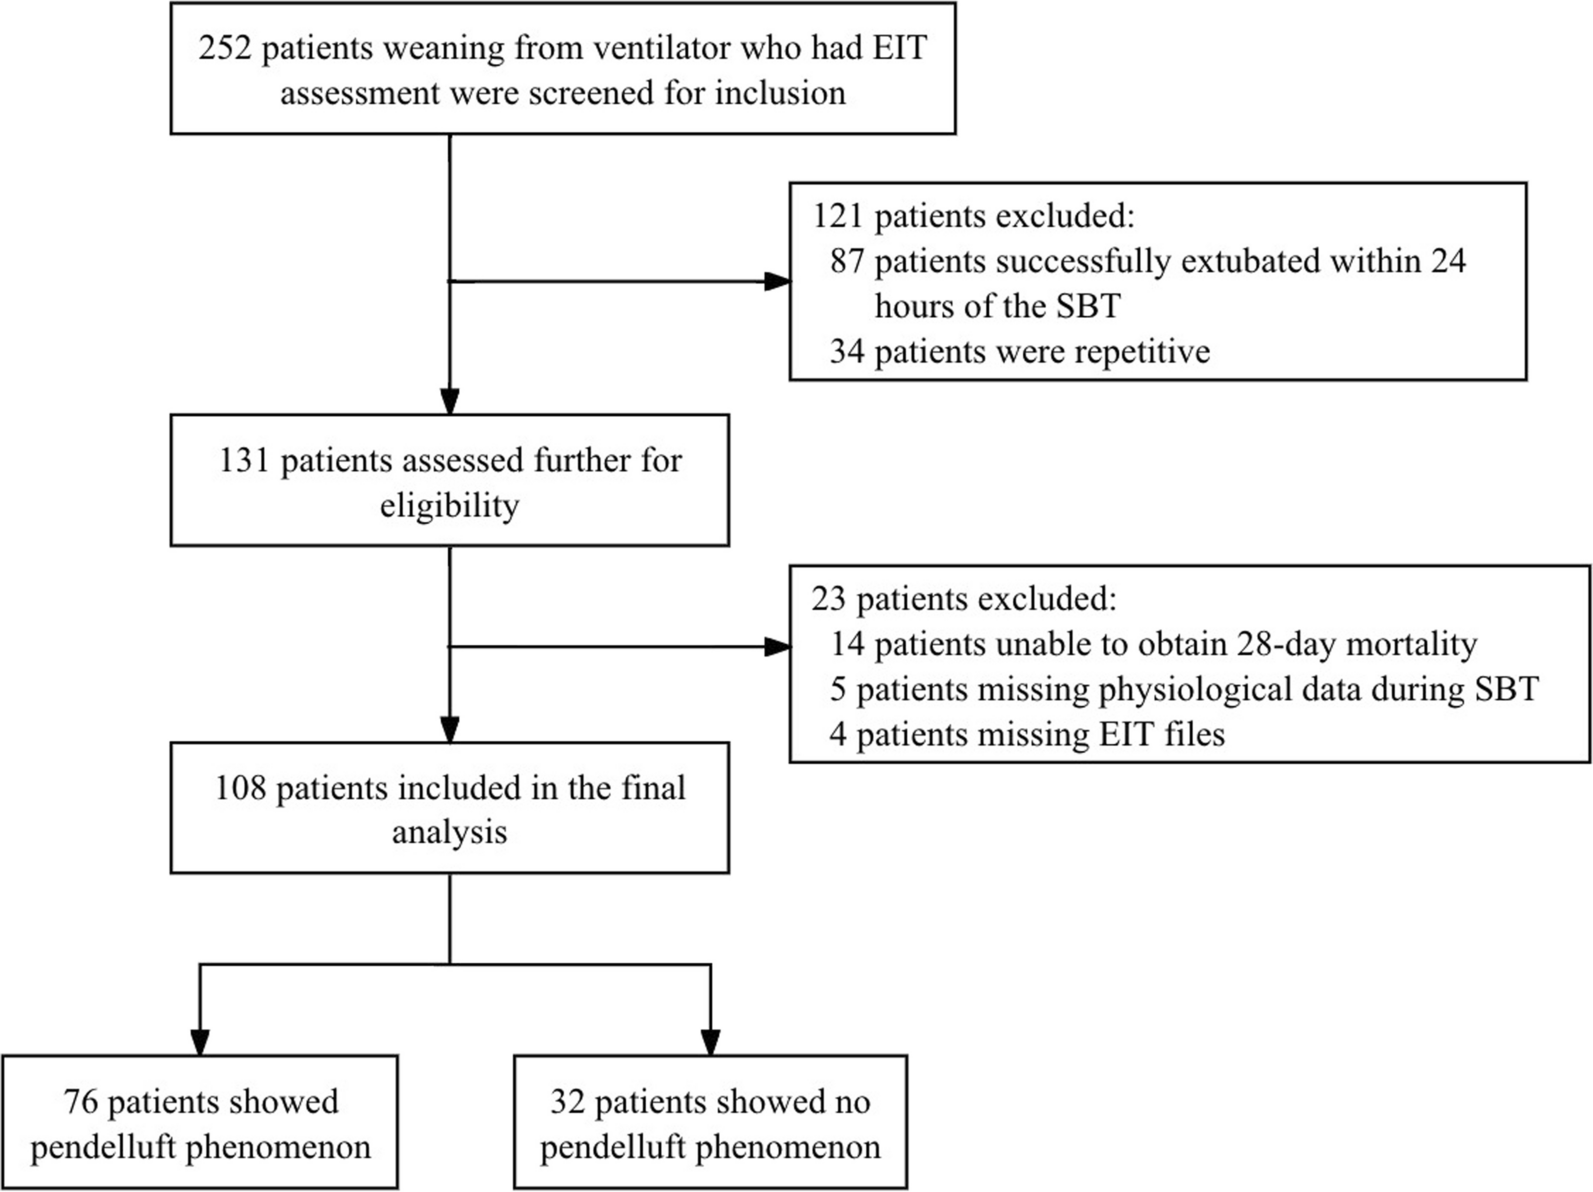 Occurrence of pendelluft during ventilator weaning with T piece correlated with increased mortality in difficult-to-wean patients